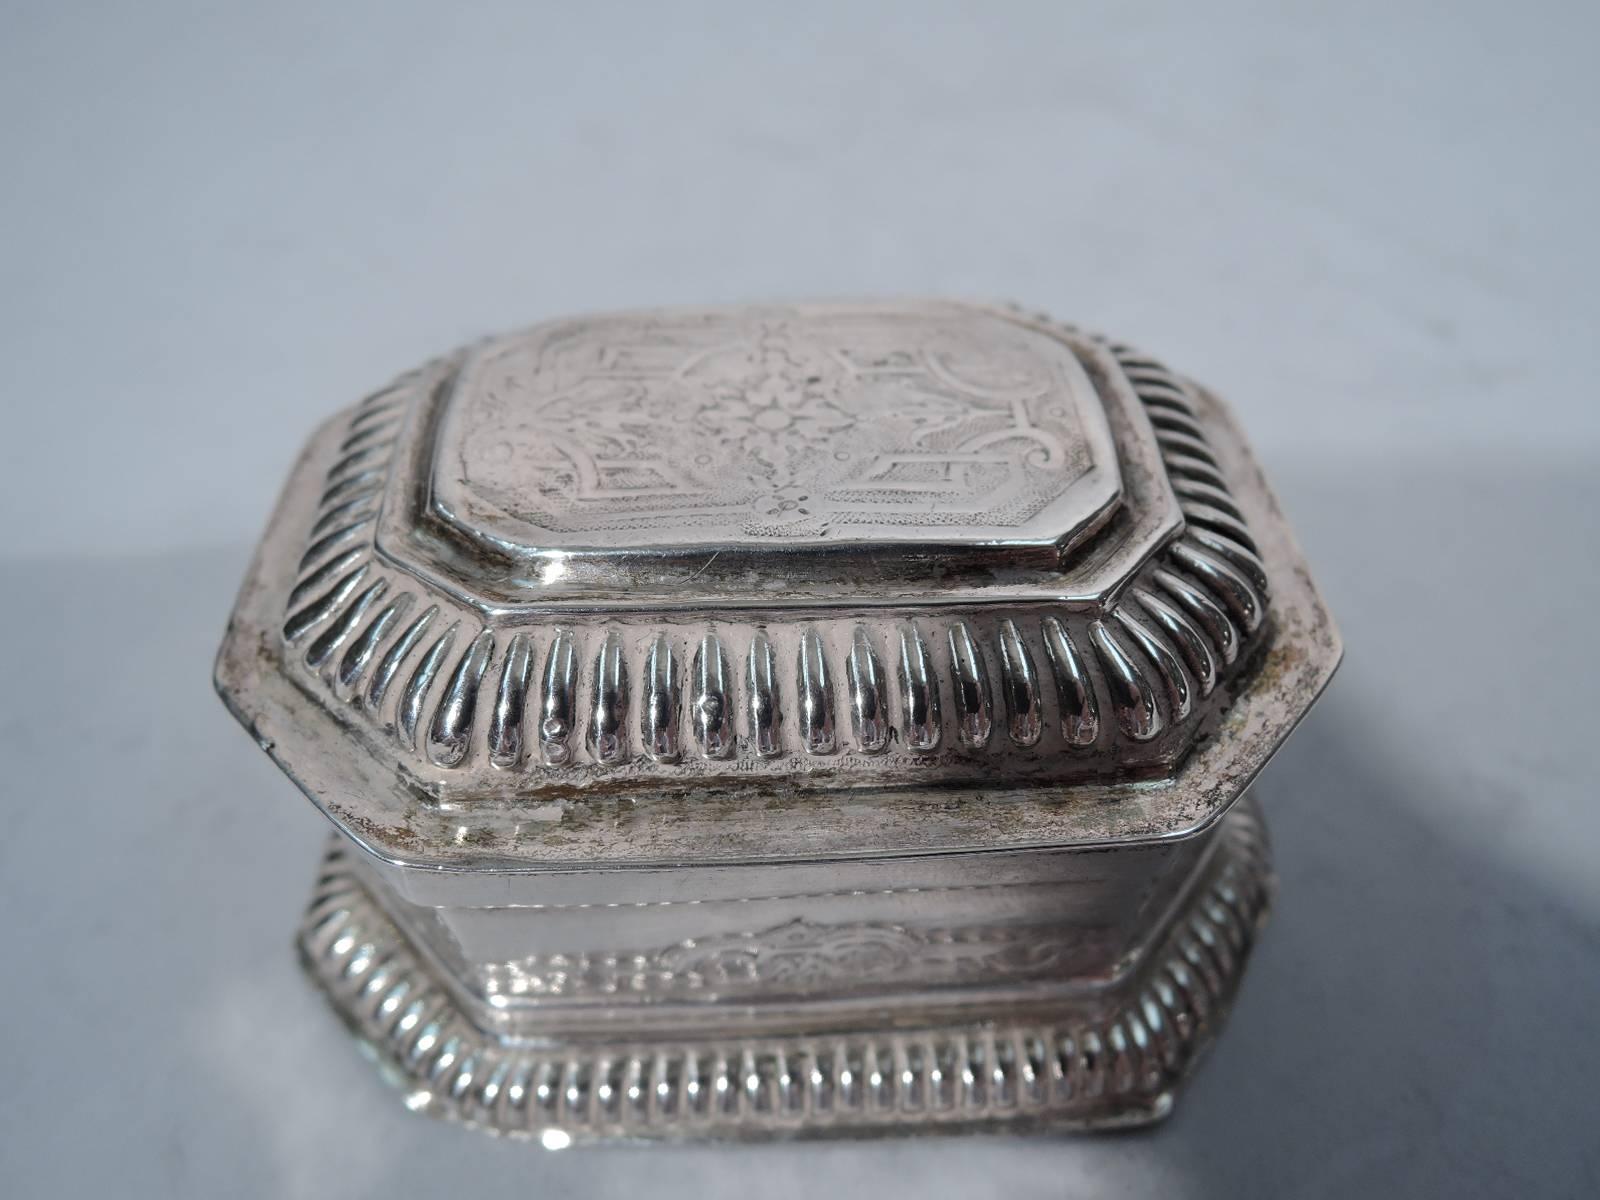 Silver spice box. Made by Johann Leonhard Eyssler in Nuremberg in early 18th century. Rectangular with chamfered corners and spread foot. Cover hinged and stepped. Gadrooning and chased strap work. Interior partitioned. Fully hallmarked on